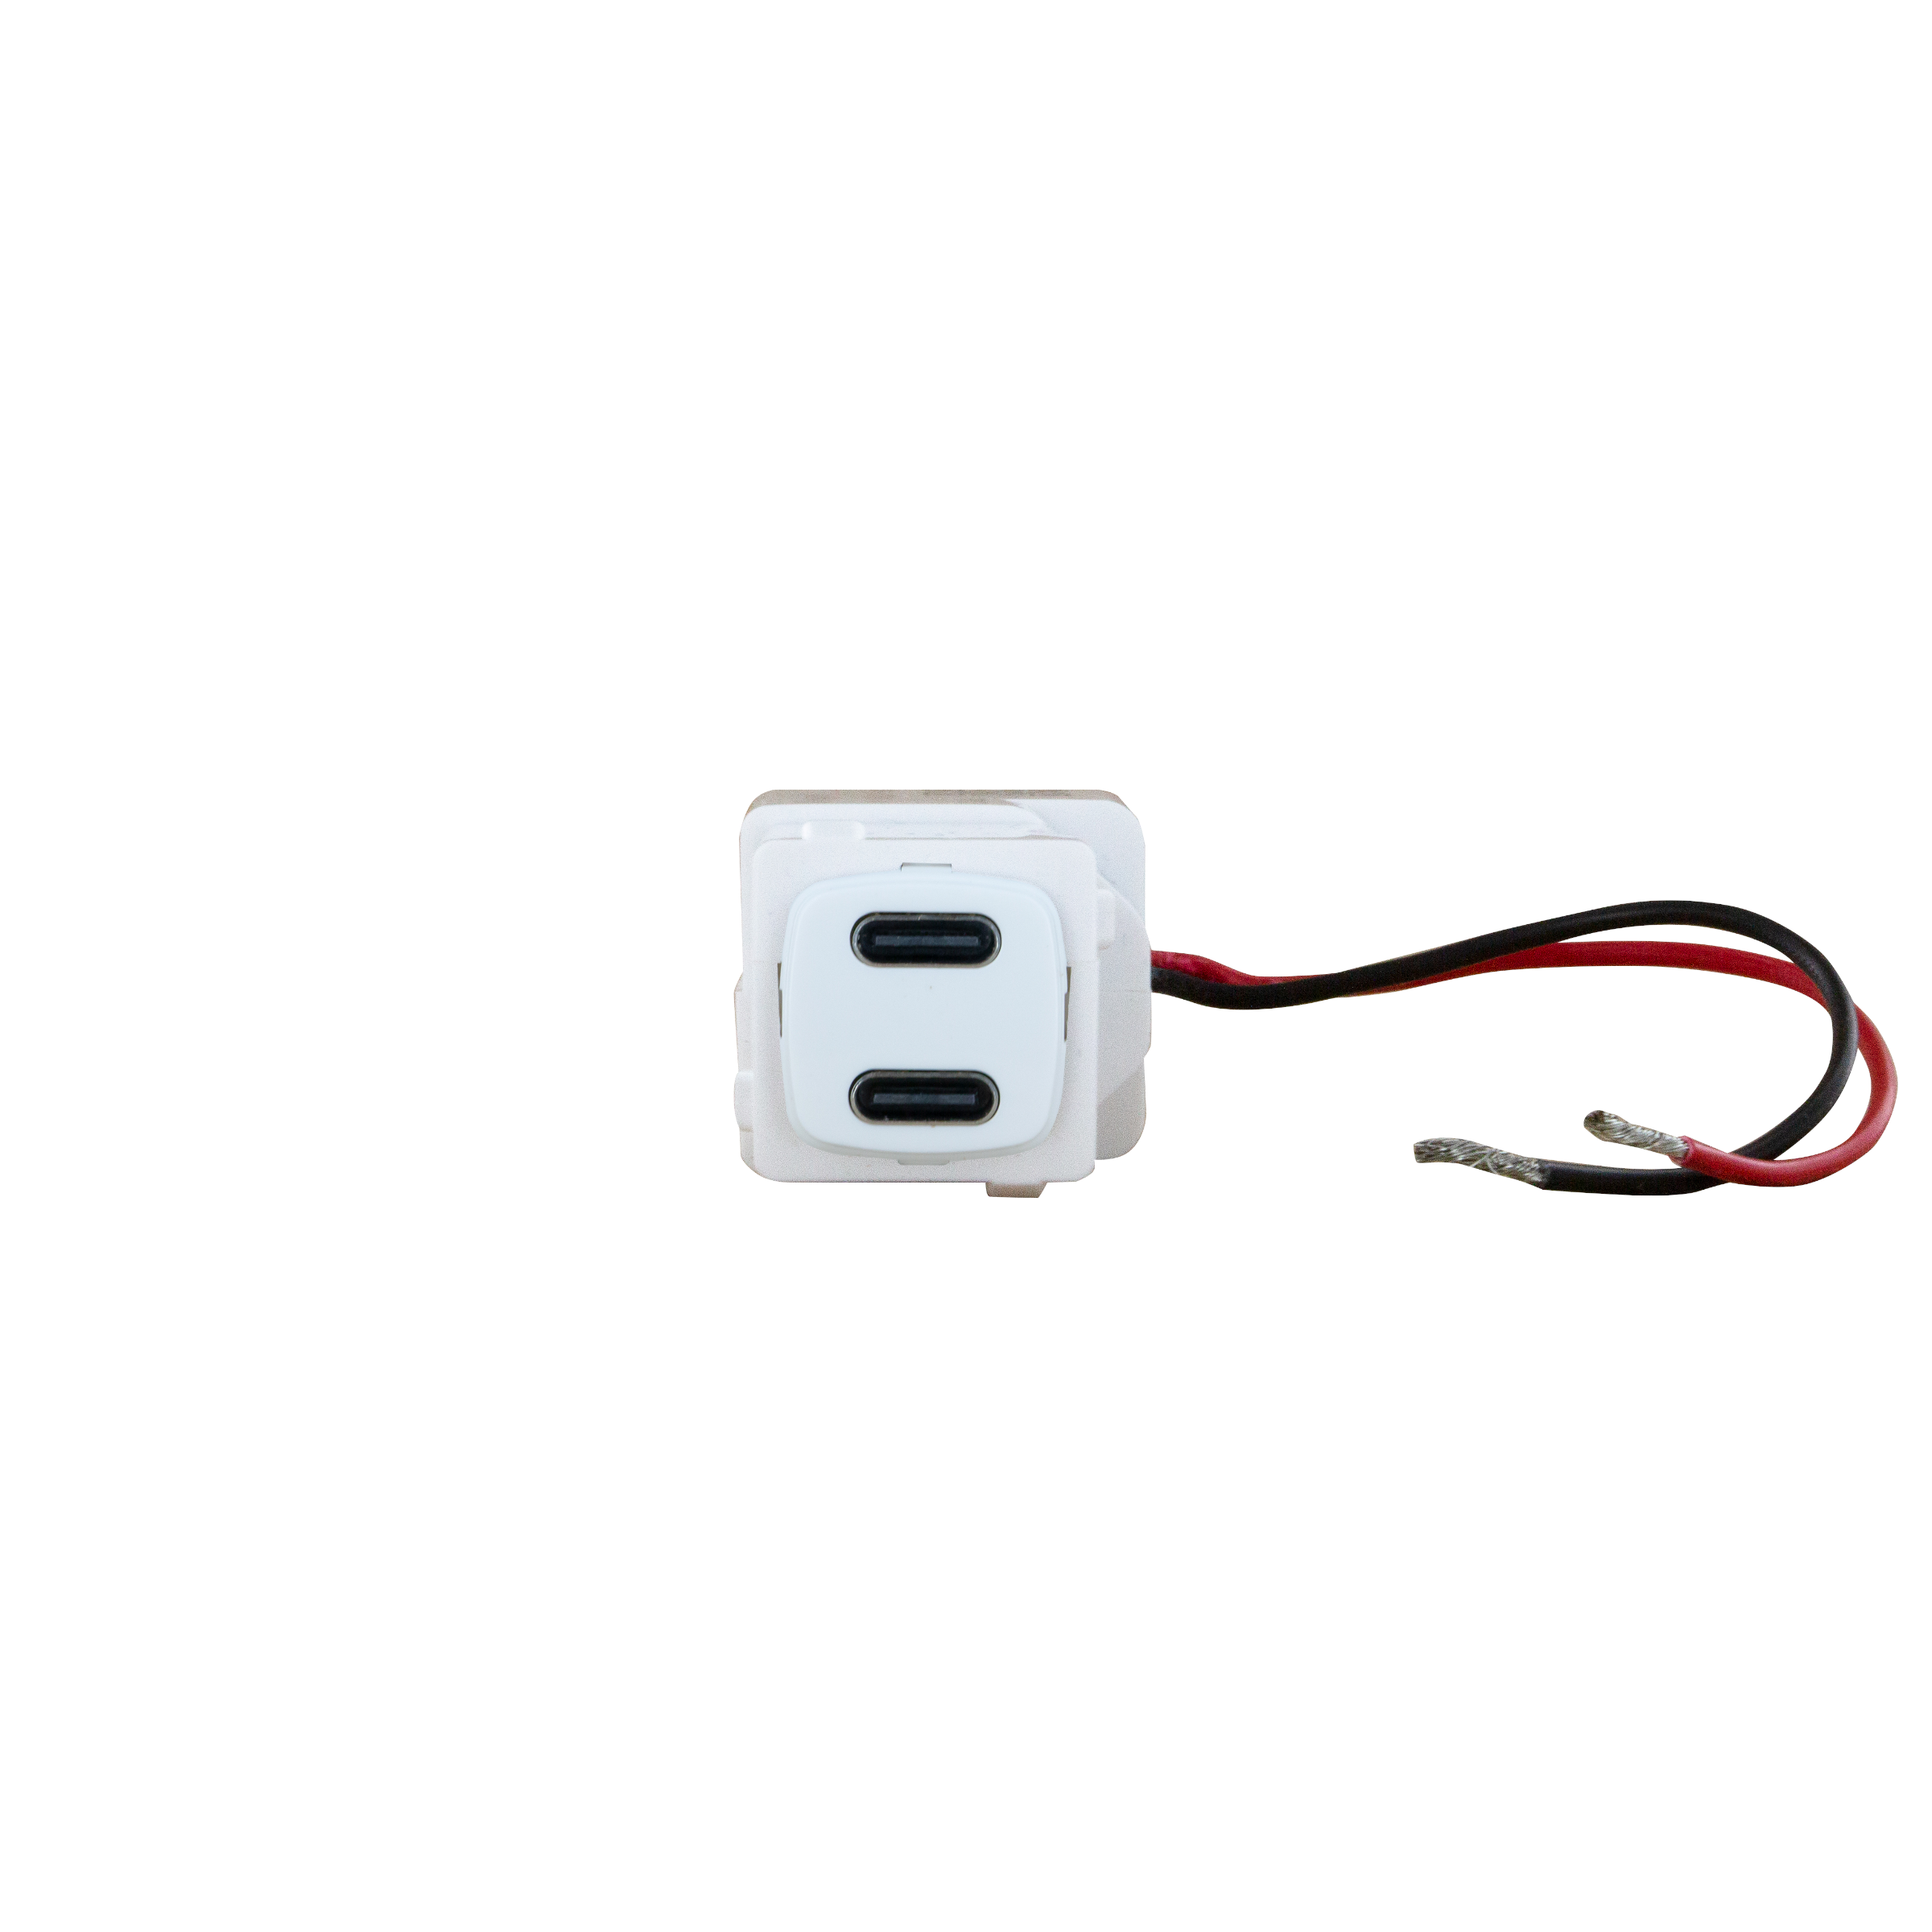 EXCEL LINEA USB CHARGER MECHANISM TYPE C+C 3A WHITE